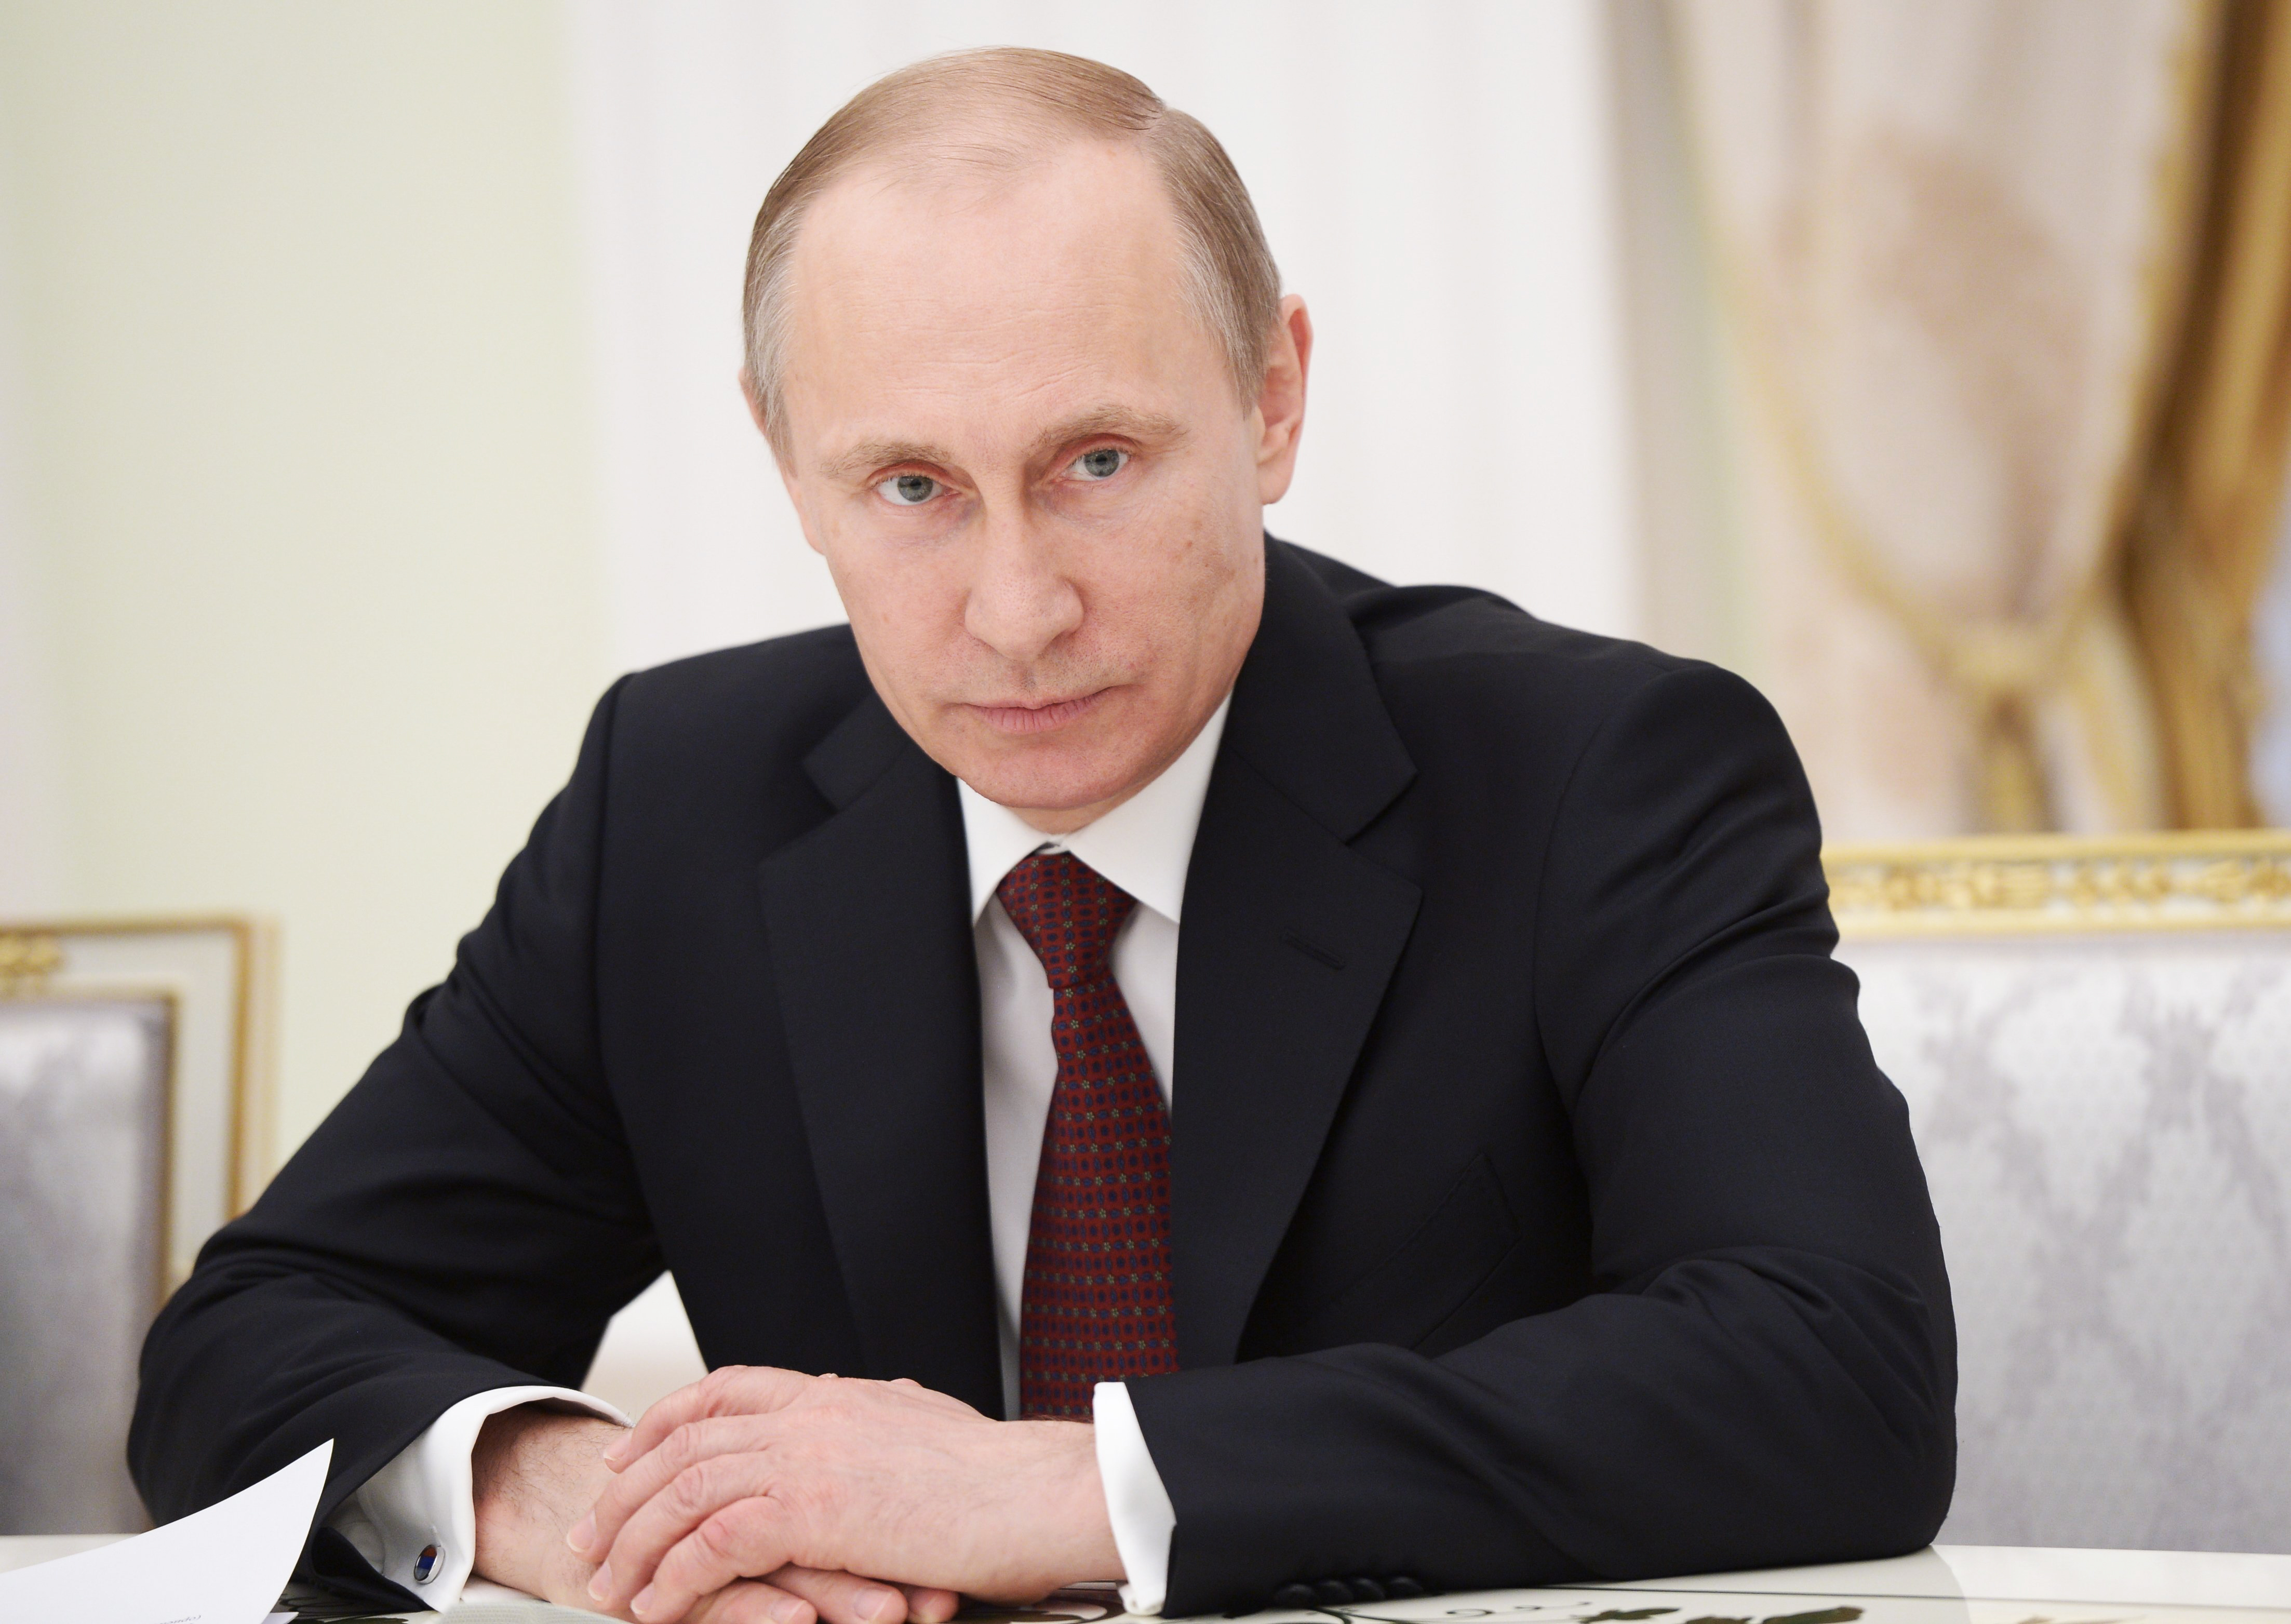 Russia's president Vladimir Putin at a meeting with representatives of the Federation of Independent Trade Unions of Russia in Moscow on May 1, 2014.